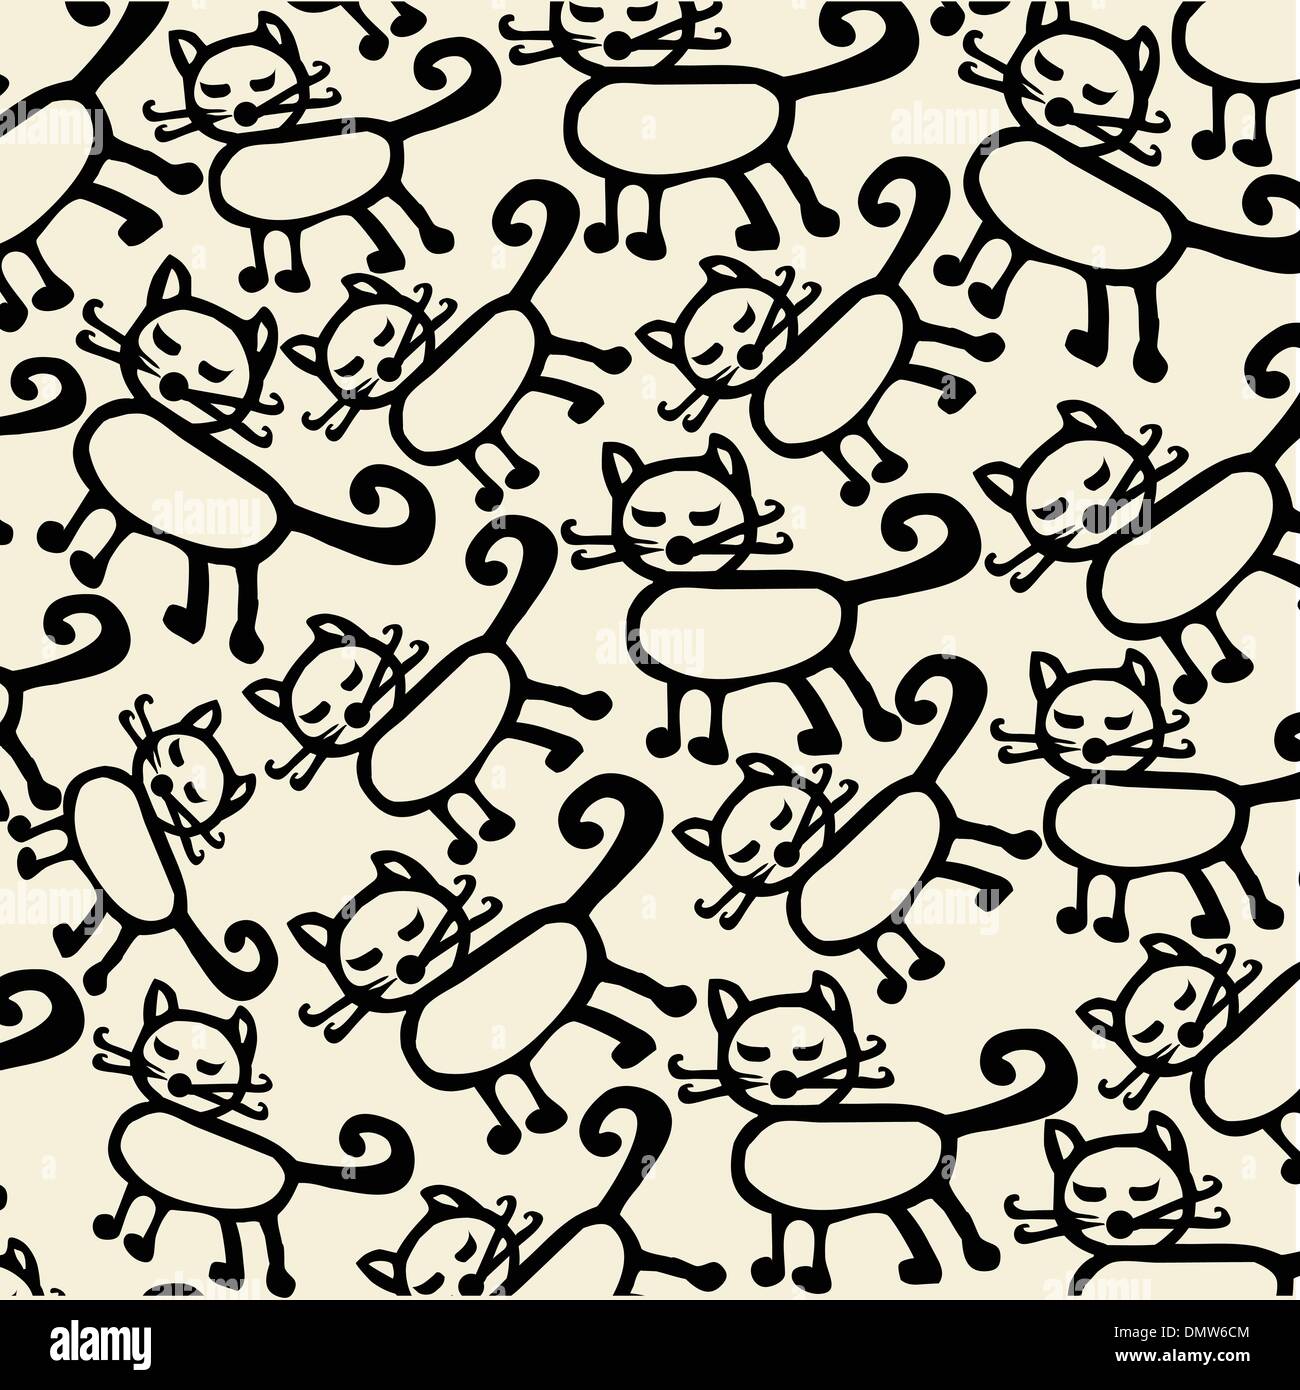 mimi cats on background Stock Vector